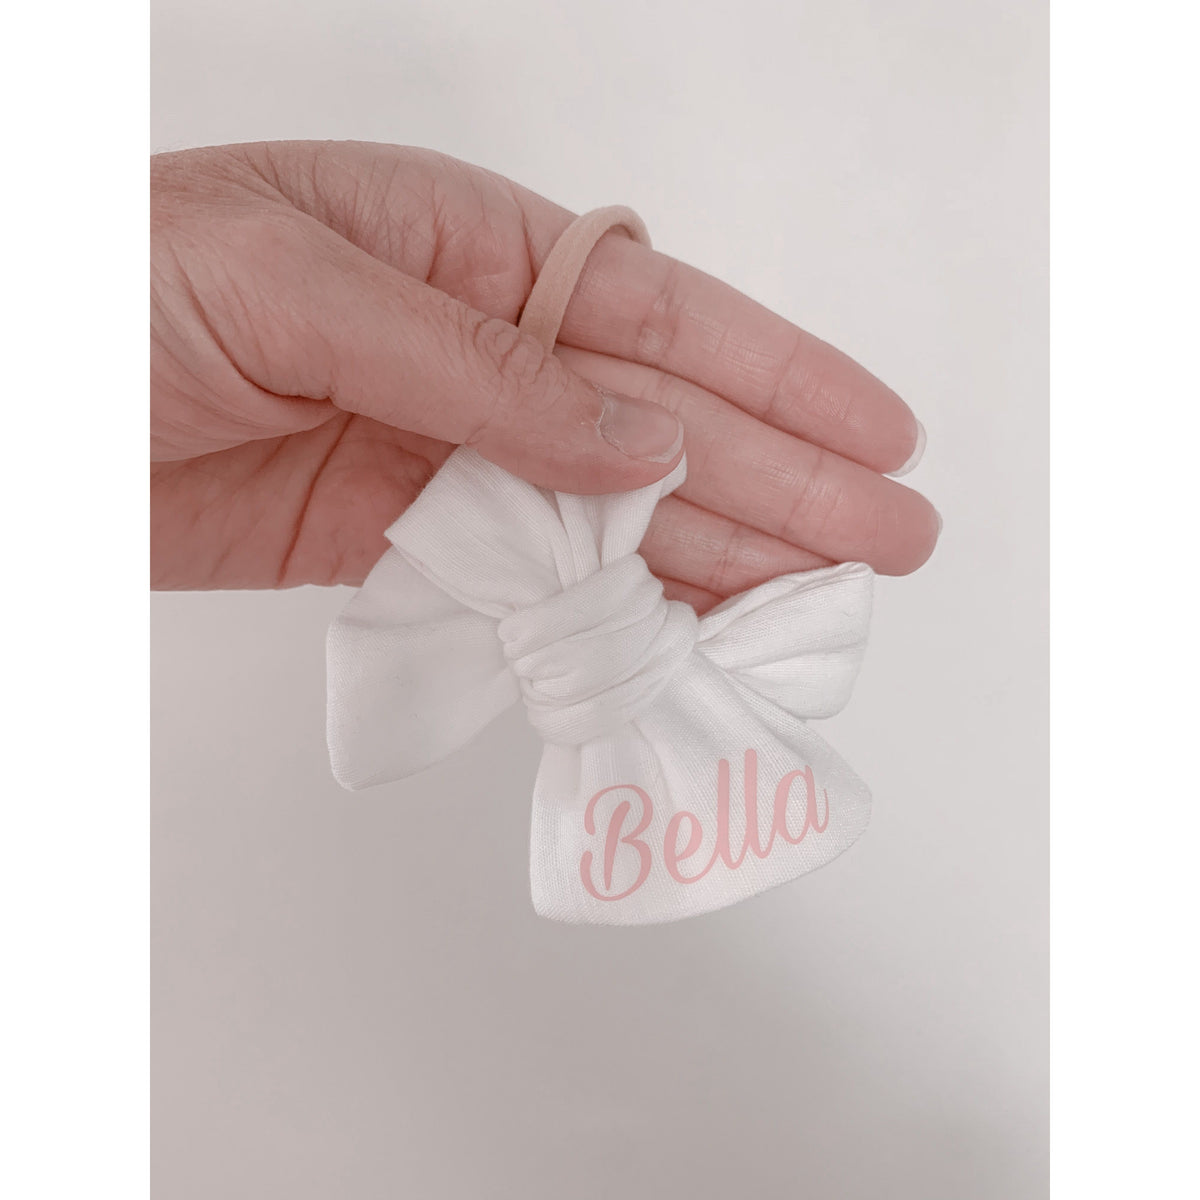 Personalised Bows